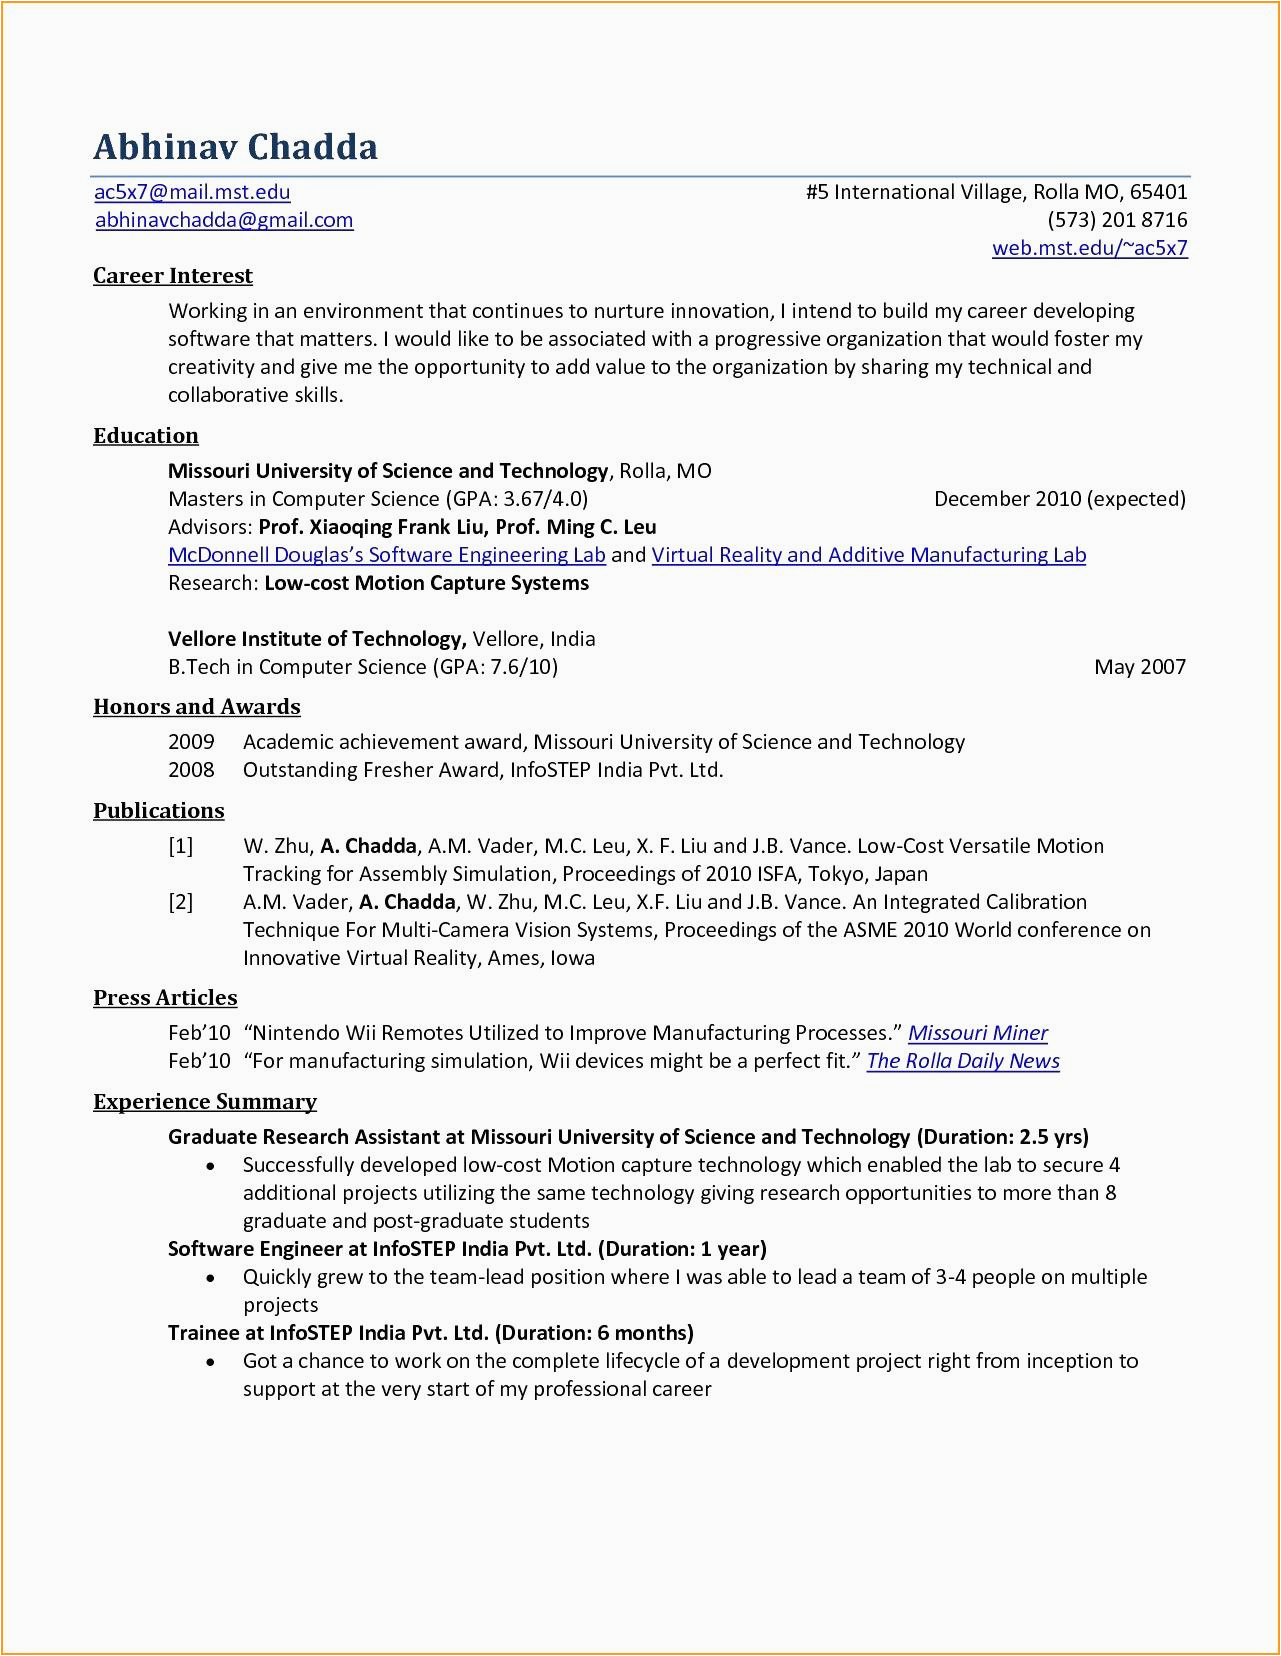 Sample Resume for Computer Science Fresh Graduate Pdf 13 Puter Science Graduate Resume Template Samples